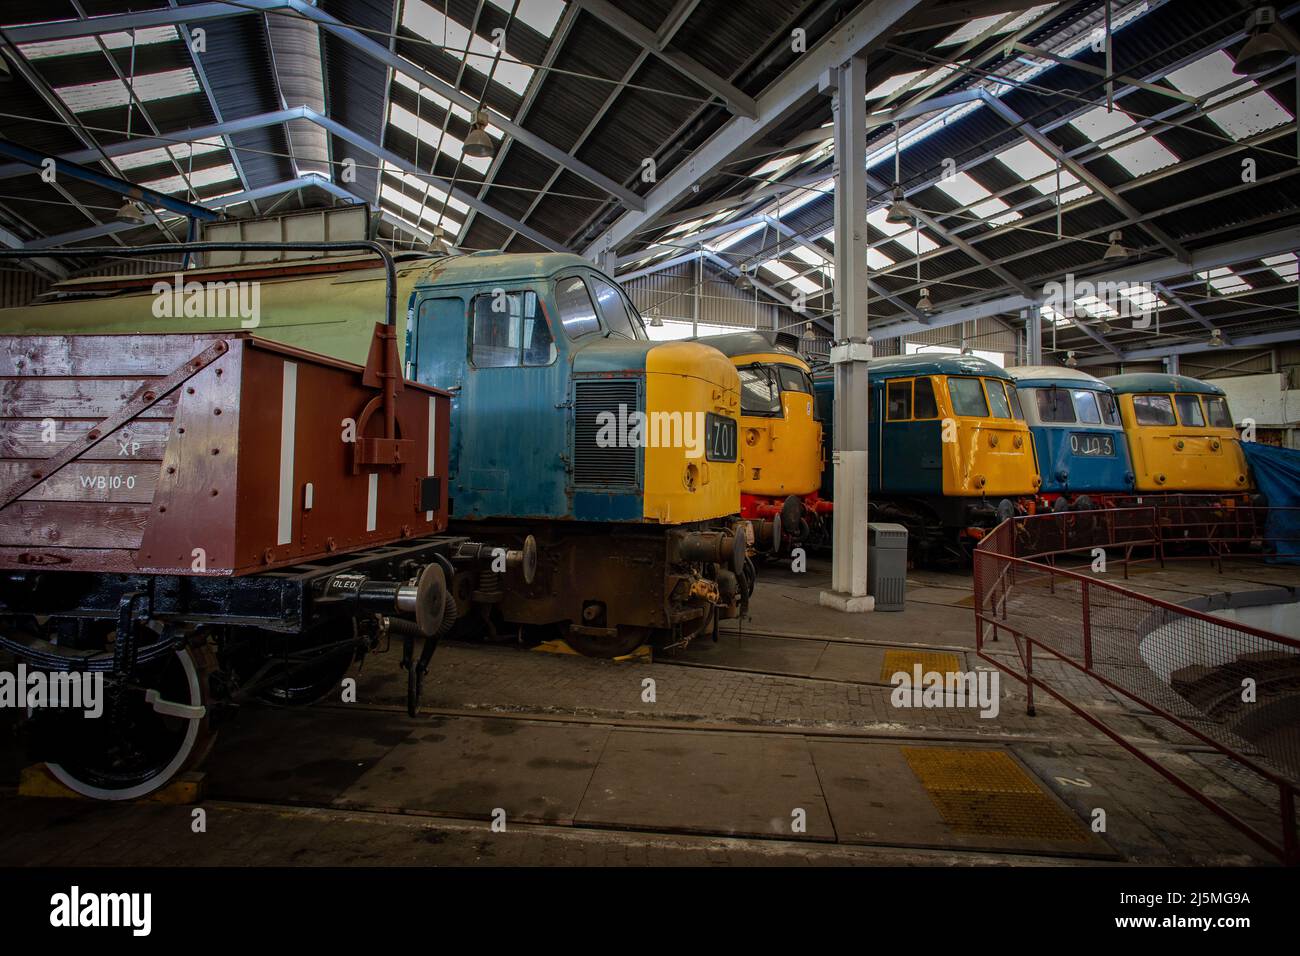 Locomotive preservation at Barrow Hill Roundhouse, Derbyshire, April 2022. Class 02, 03, 08 20, 45, 82, 55, 89, 47, 91 Stock Photo